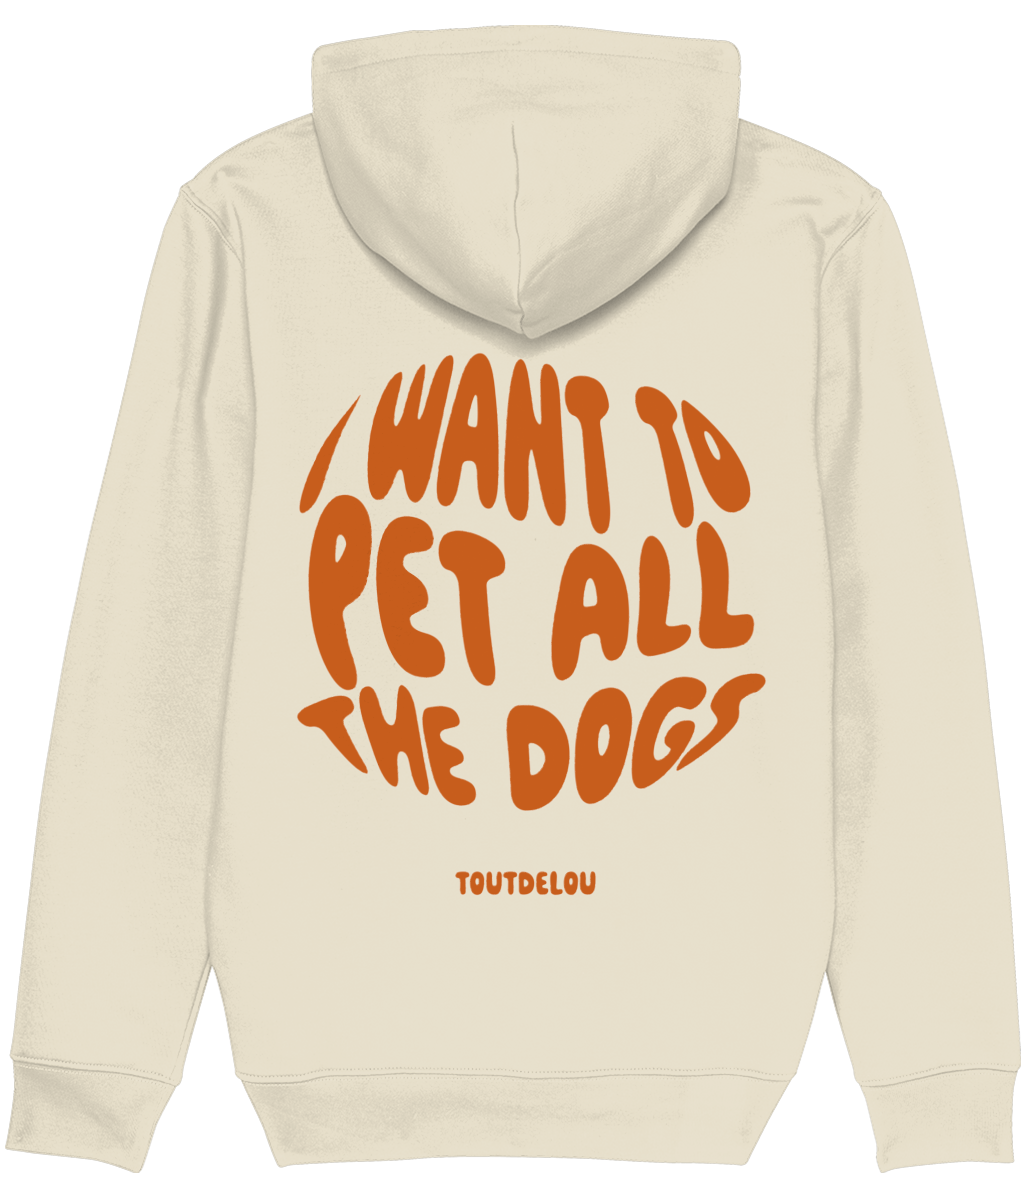 Hoodie - pet all dogs - orange - print on front and back